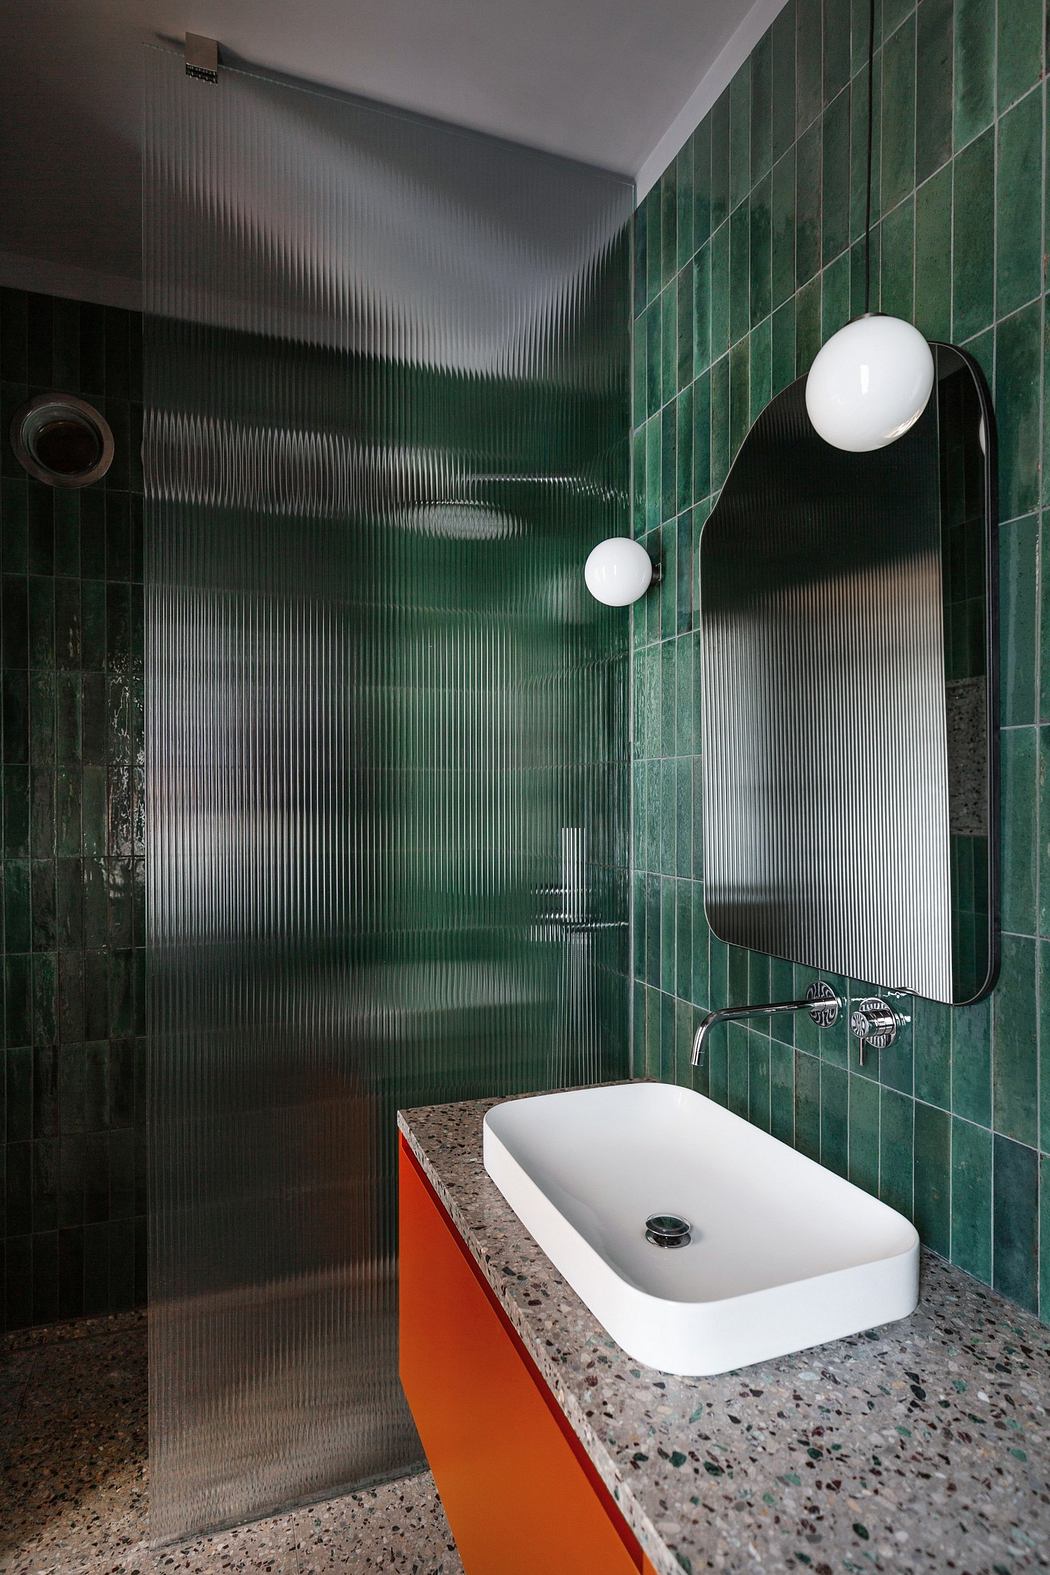 Modern bathroom with green tiles, glass partition, and an orange cabinet.